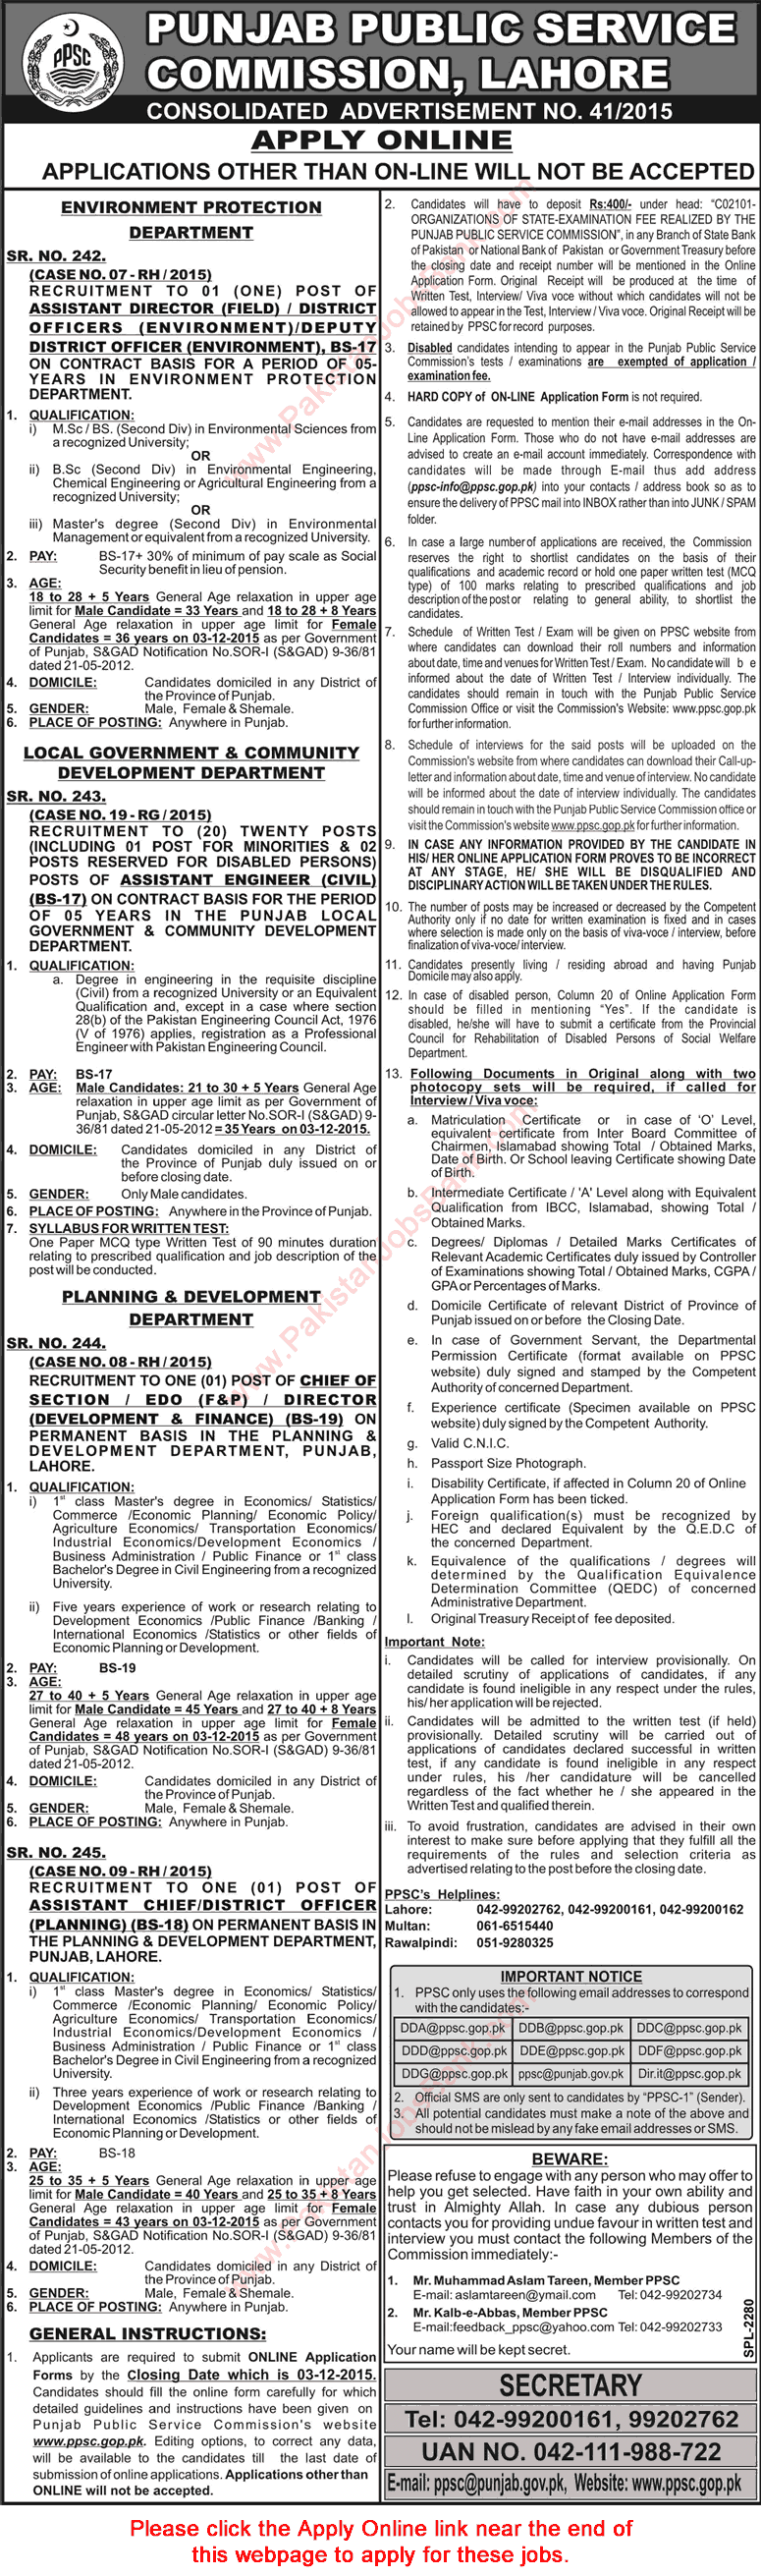 PPSC Jobs November 2015 Consolidated Advertisement No. 41/2015 Apply Online Latest